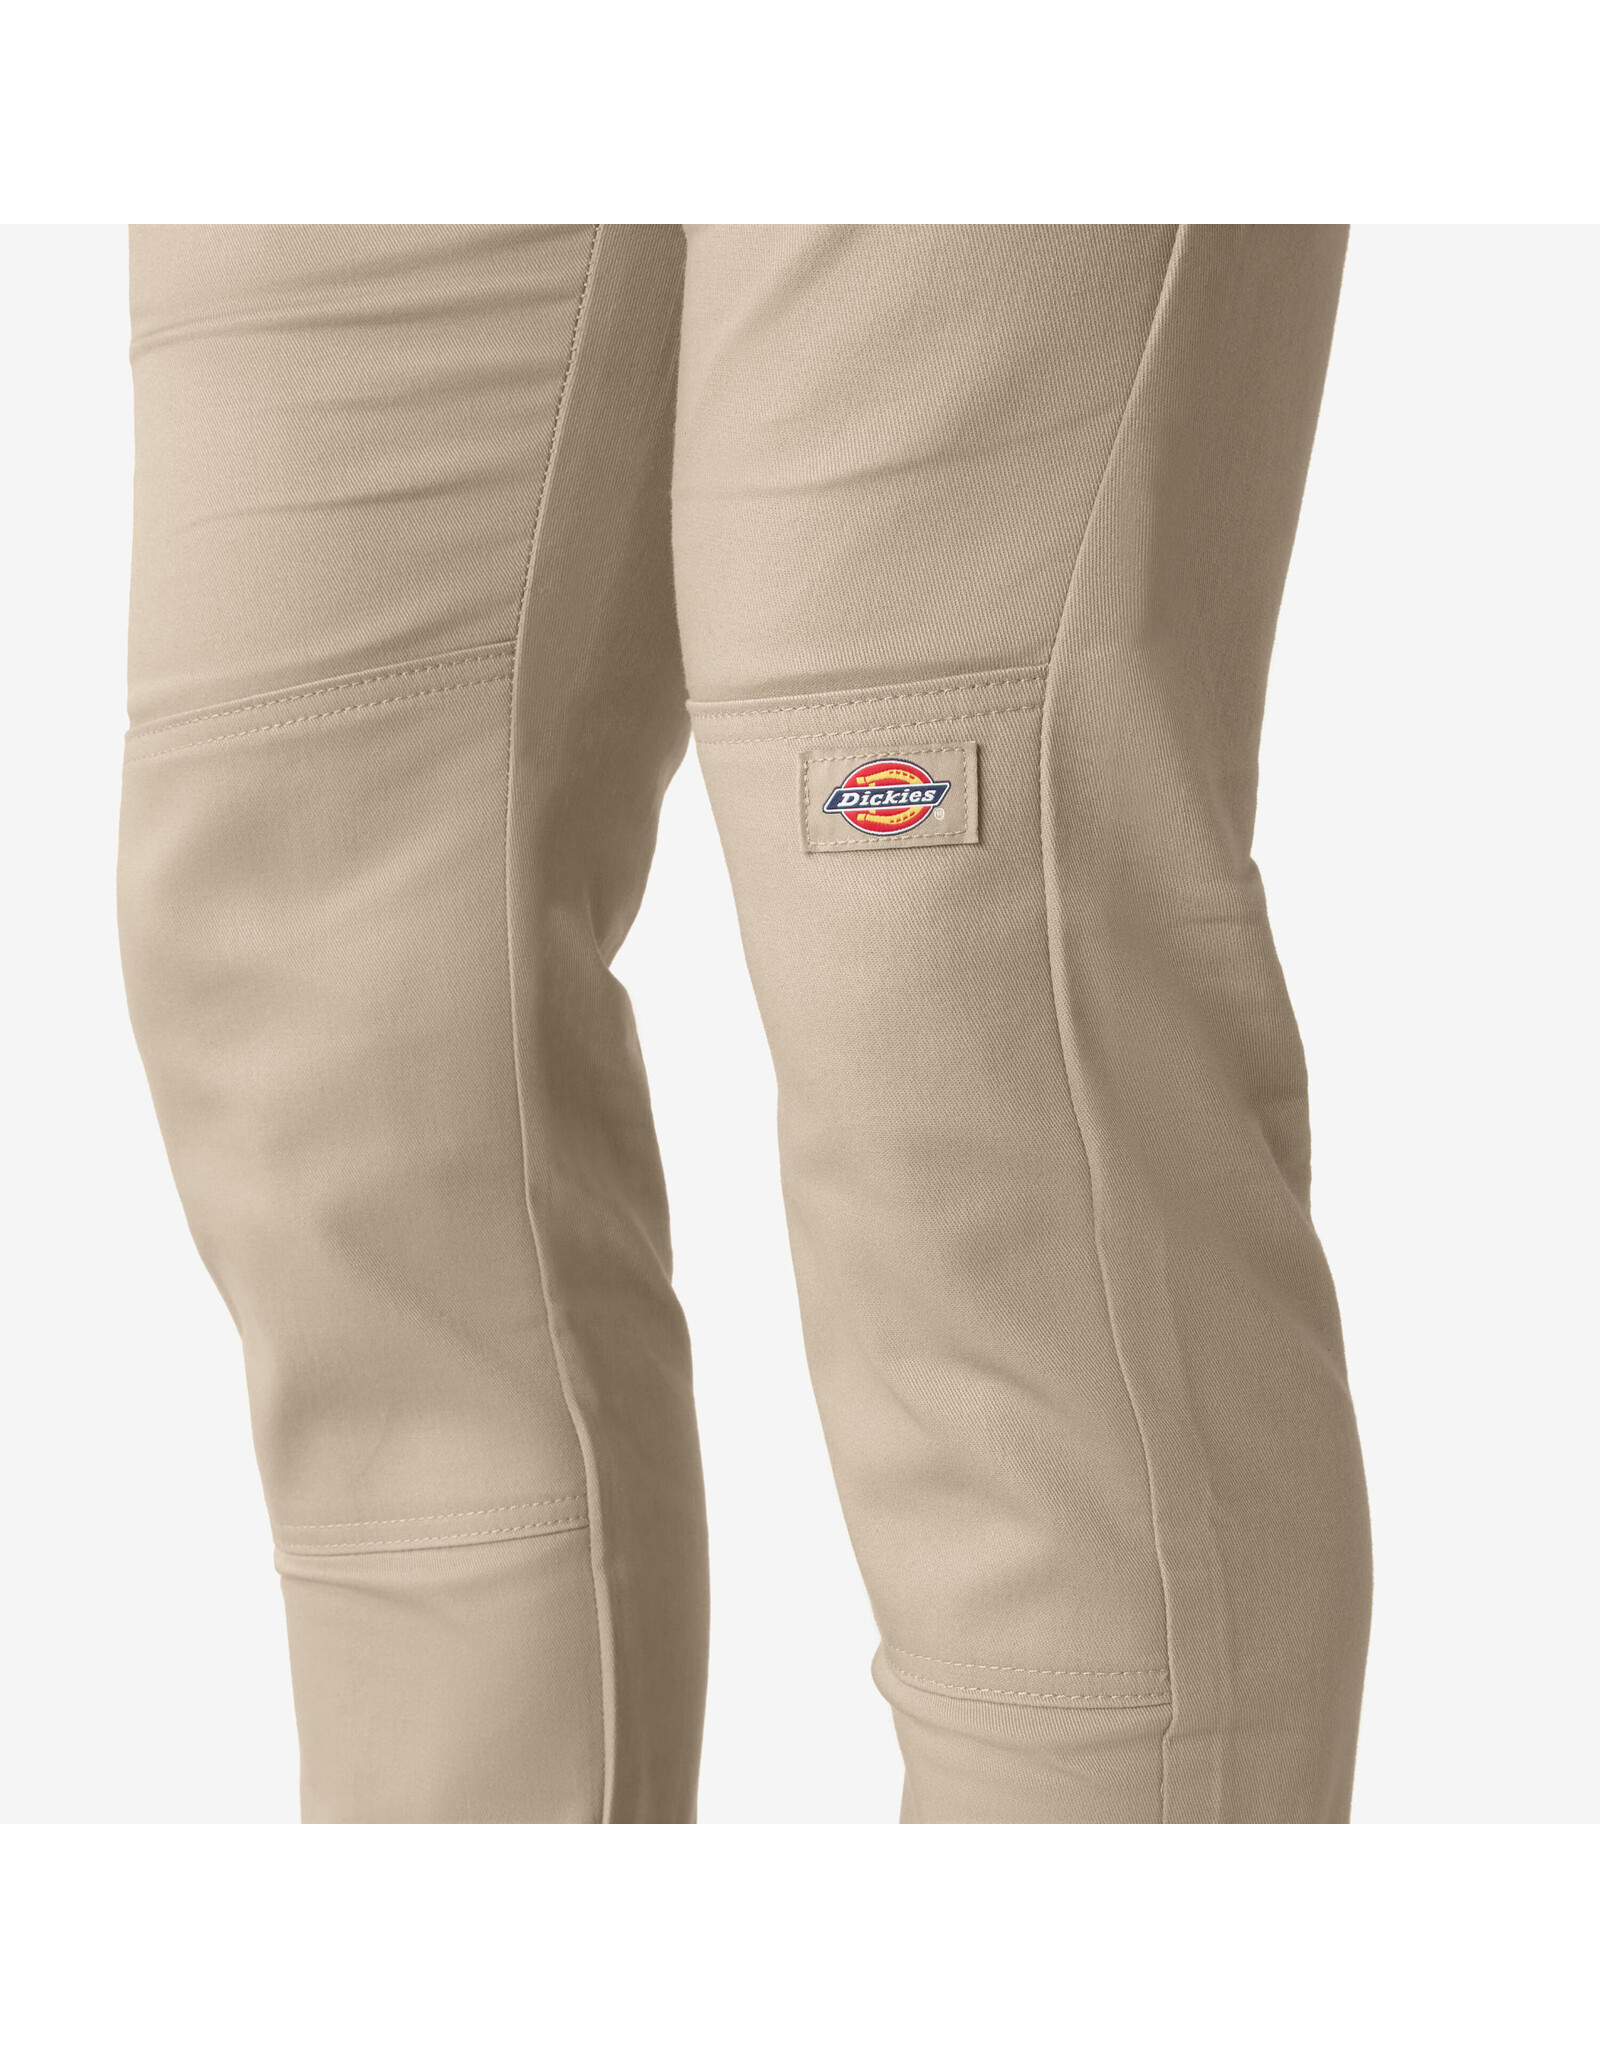 DICKIES Skinny Fit Double Knee Work Pants Desert Sand - WP811DS - Boutique  X20 MTL